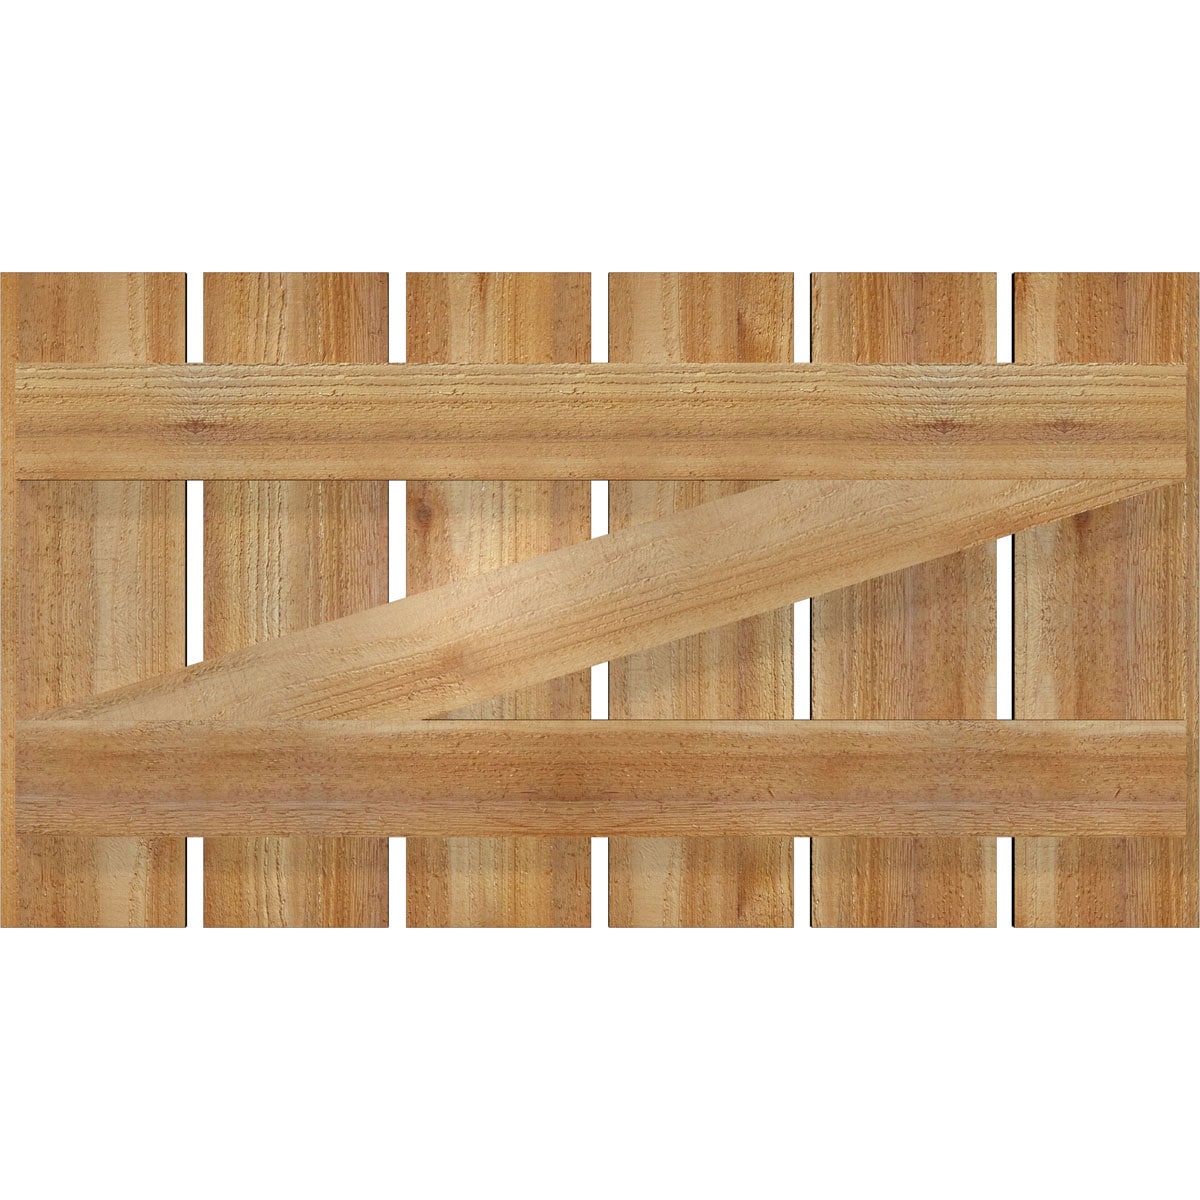 Ekena Millwork 2-Pack 34.75-in W x 19-in H Unfinished Board and Batten Spaced with z-bar Wood Western Red cedar Exterior Shutters